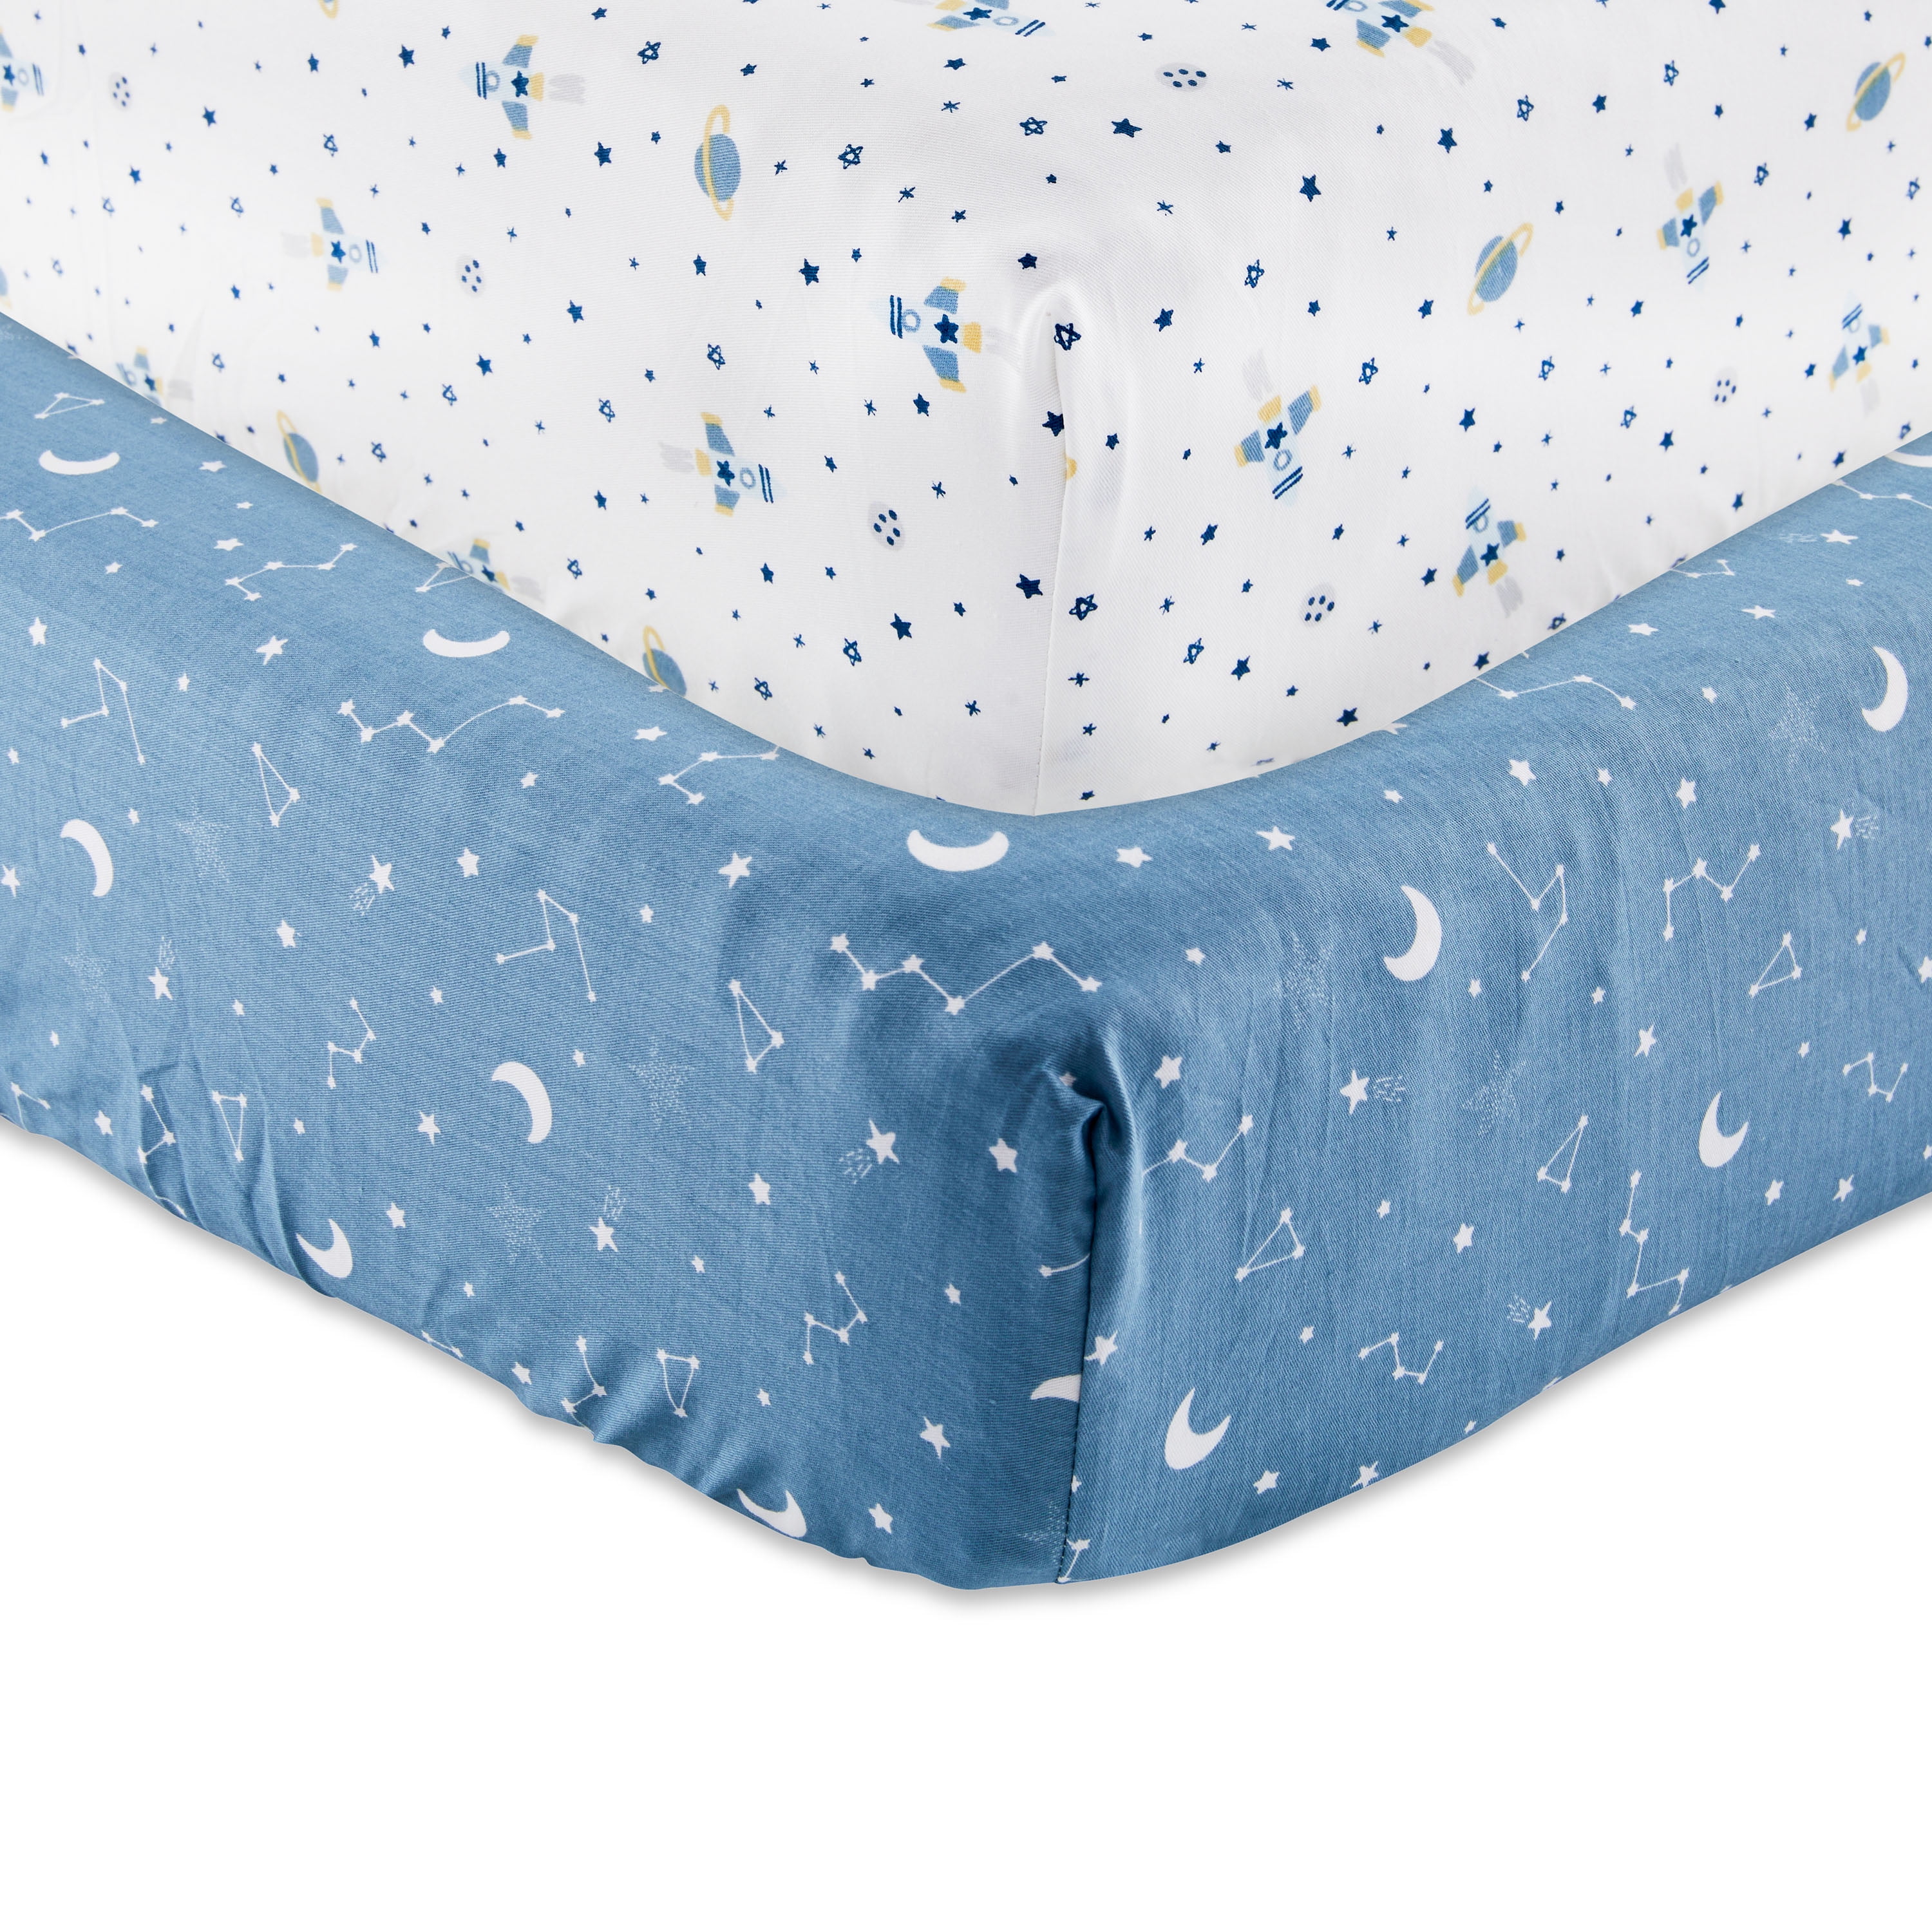 Parent's Choice 100% Cotton Fitted Crib Sheets for Baby Boys, Blue, Space, 2 Count